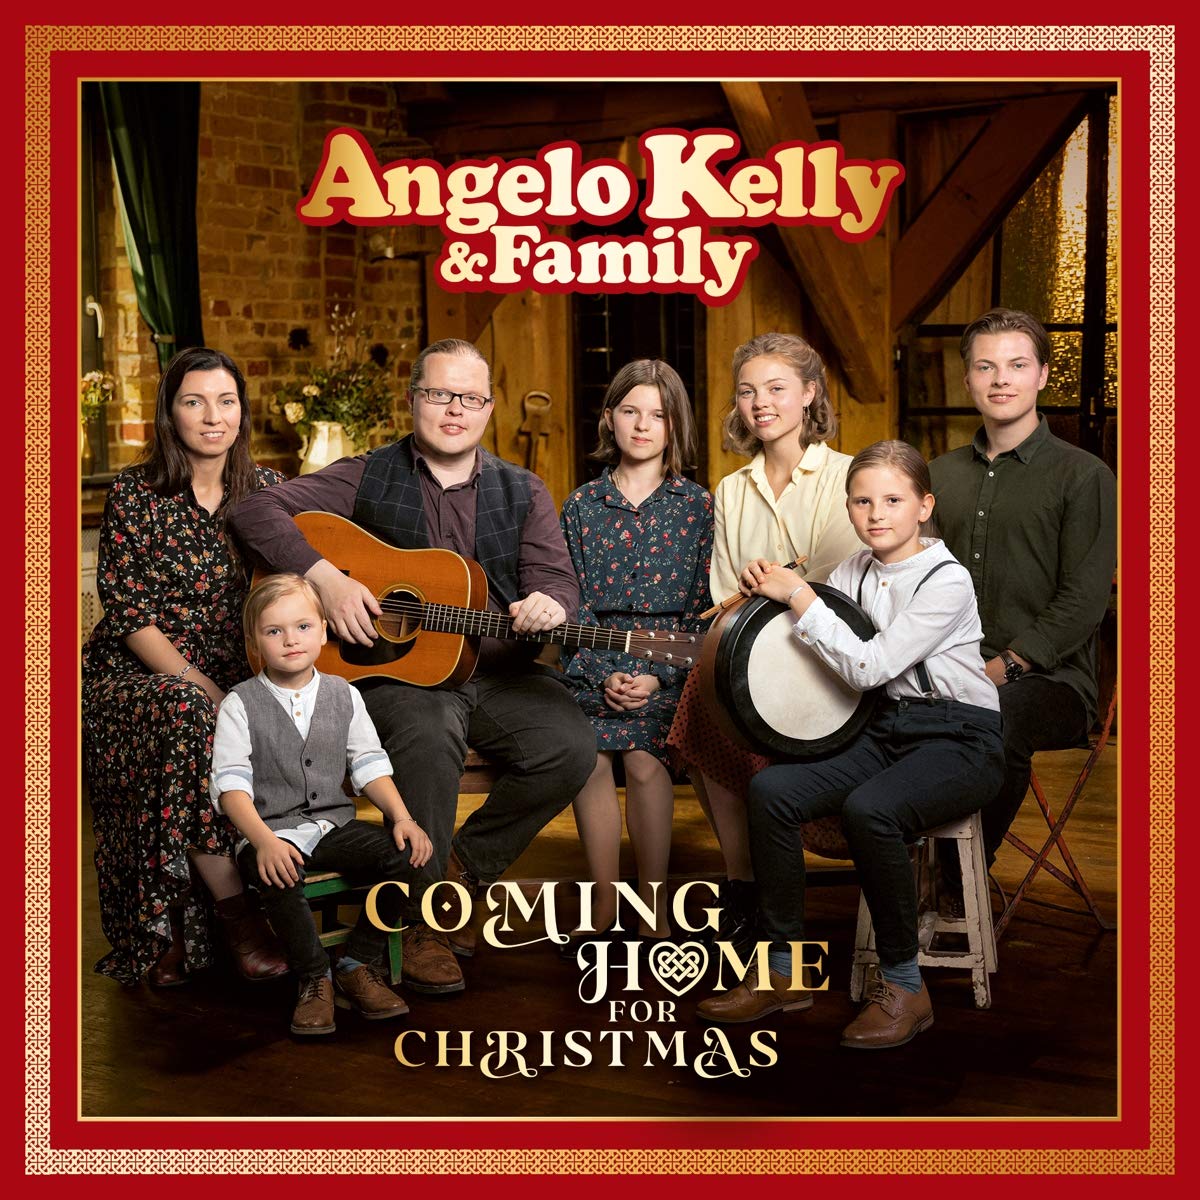 Angelo Kelly & Family: Coming Home For Christmas das Weihnachtsalbum